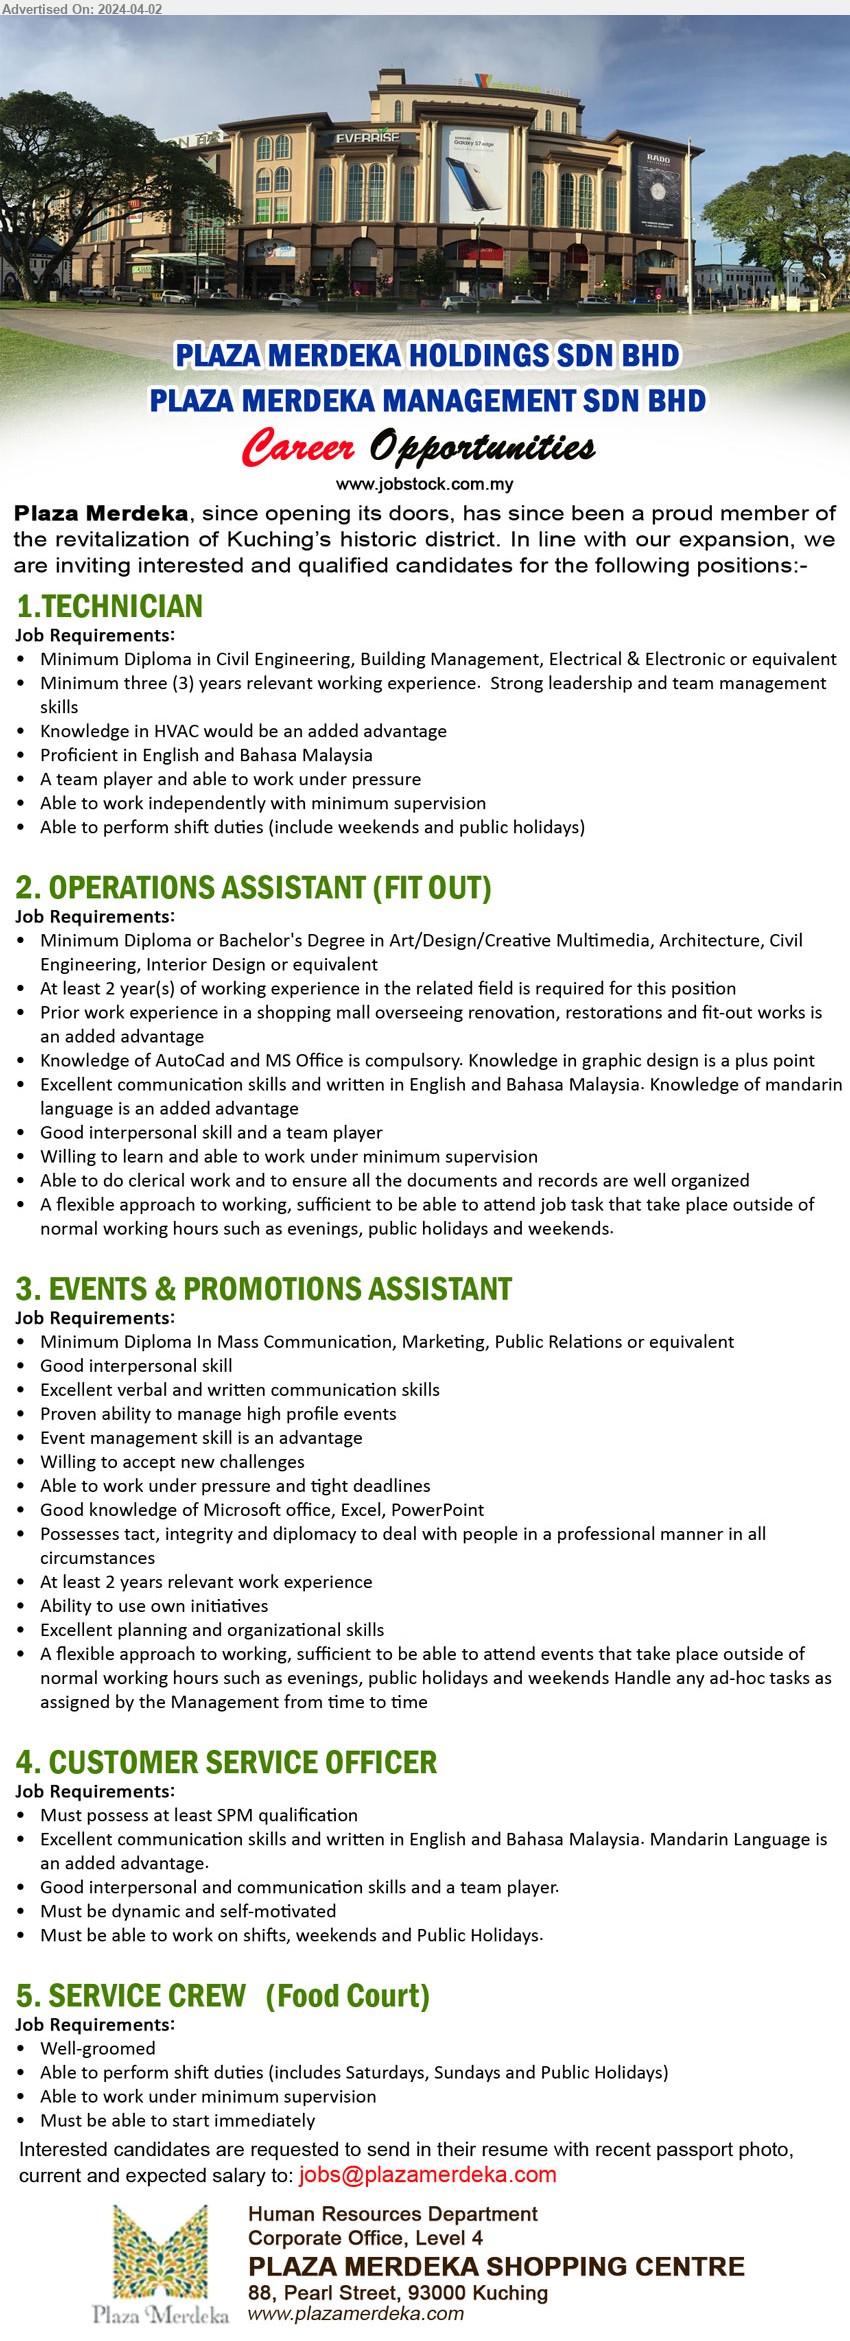 PLAZA MERDEKA SHOPPING CENTRE - 1. TECHNICIAN (Kuching),  Diploma in Civil Engineering, Building Management, Electrical & Electronic,...
2. OPERATIONS ASSISTANT (FIT OUT) (Kuching), Diploma or Bachelor's Degree in Art/Design/Creative Multimedia, Architecture, Civil Engineering, Interior Design,...
3. EVENTS & PROMOTIONS ASSISTANT (Kuching),  Diploma In Mass Communication, Marketing, Public Relations,...
4. CUSTOMER SERVICE OFFICER (Kuching), SPM, Excellent communication skills and written in English and Bahasa Malaysia. Mandarin Language is an added advantage.,...
5. SERVICE CREW   (Food Court) (Kuching), Well-groomed, Able to perform shift duties,...
Email resume to ....